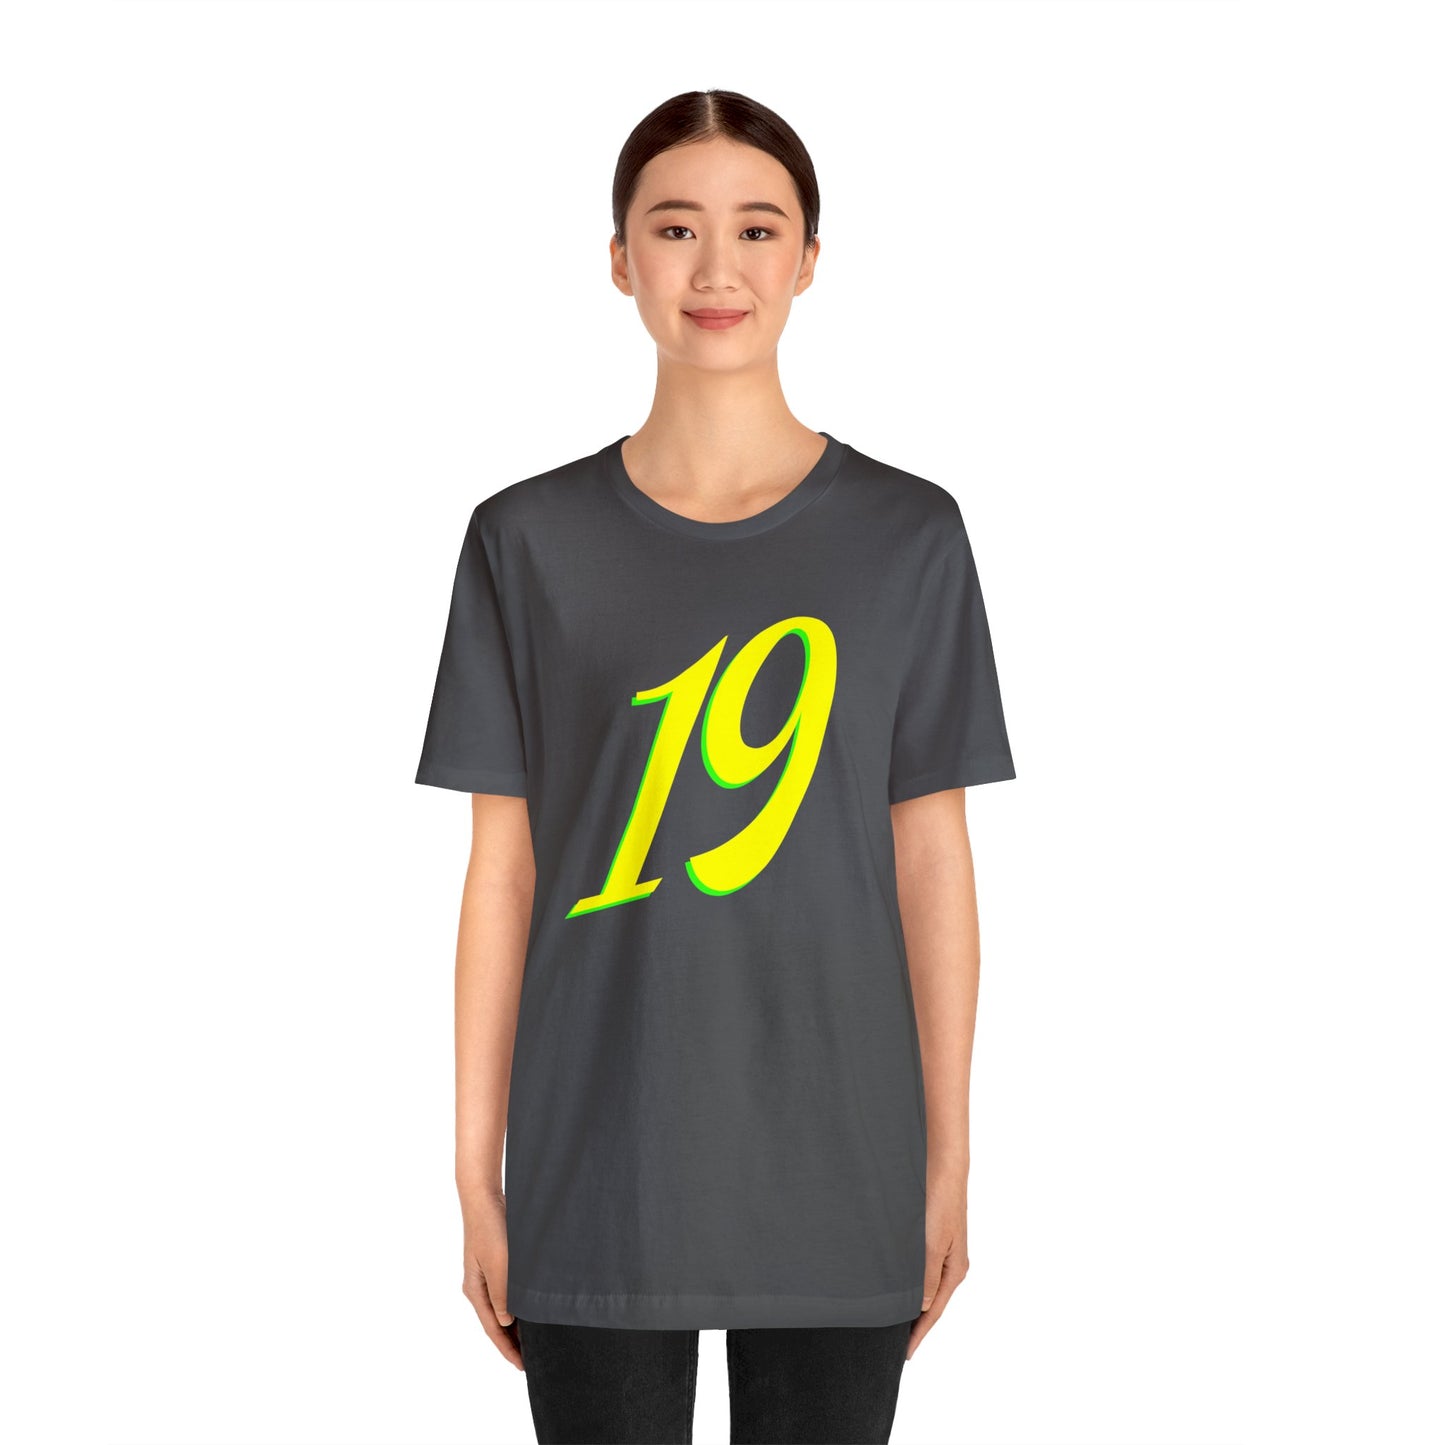 Number 19 Design - Soft Cotton Tee for birthdays and celebrations, Gift for friends and family, Multiple Options by clothezy.com in Asphalt Size Medium - Buy Now